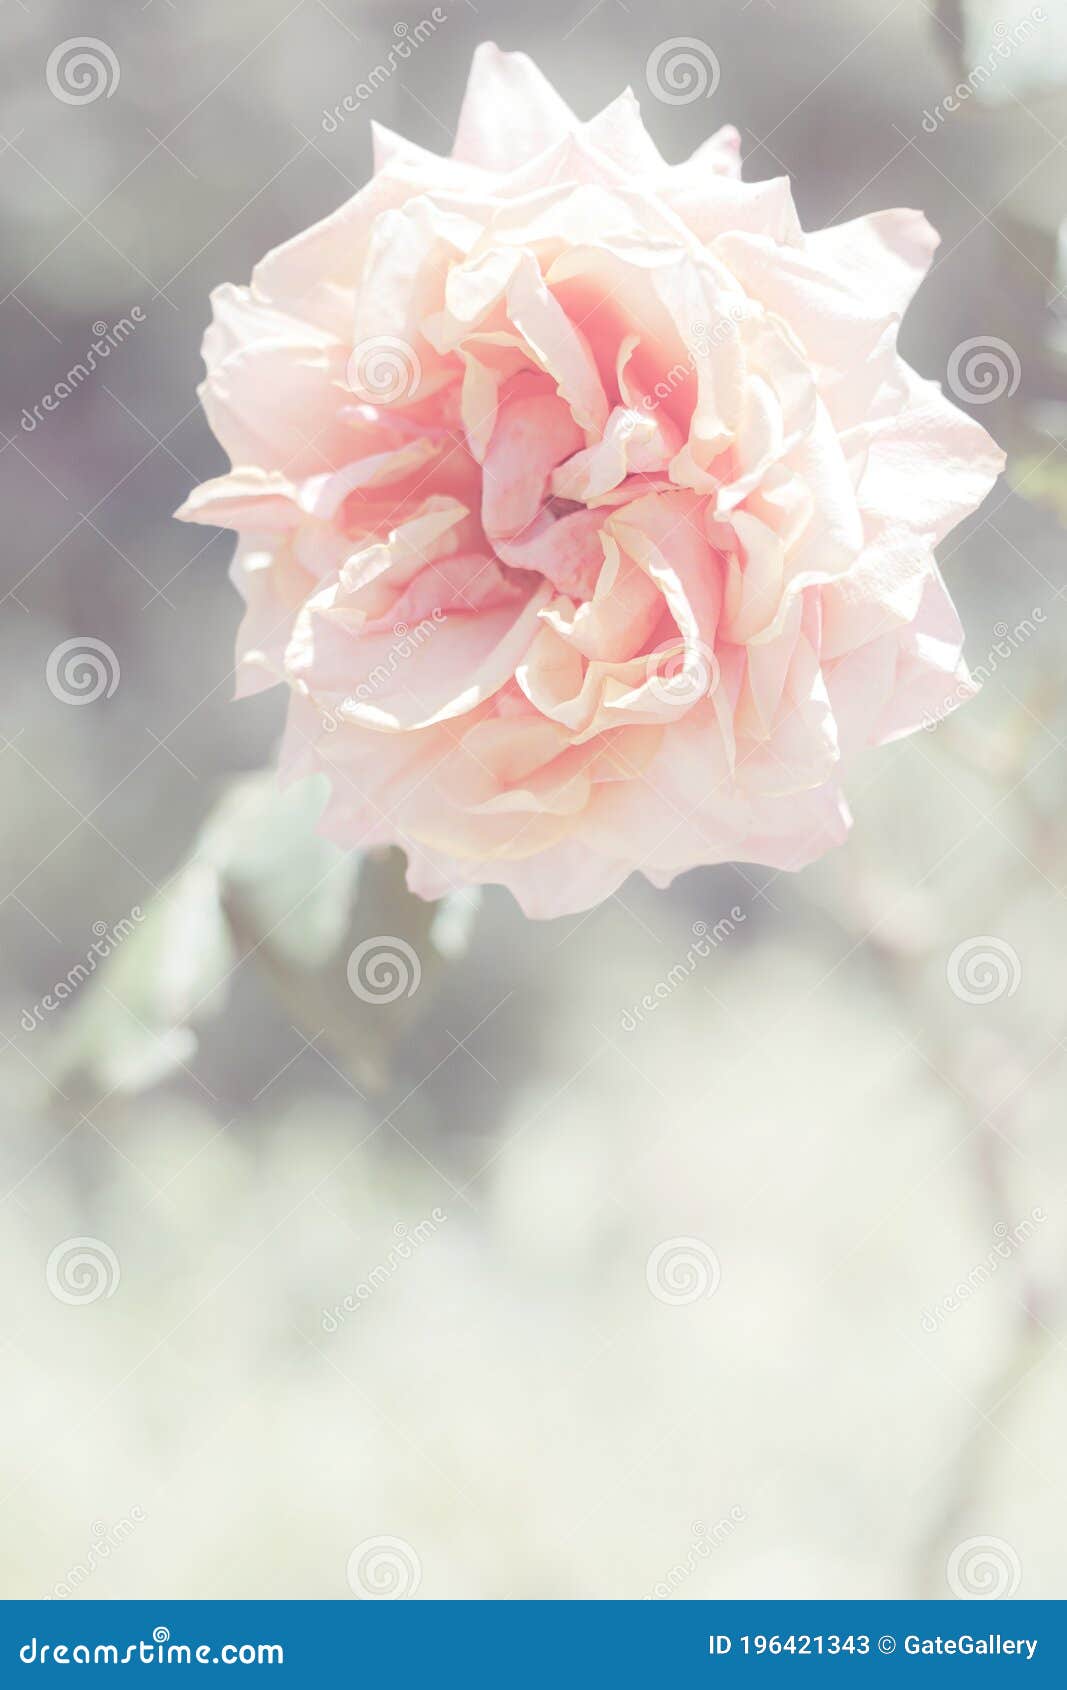 Garden Rose, Great Maiden`s Blush, Floral Background Stock Image ...